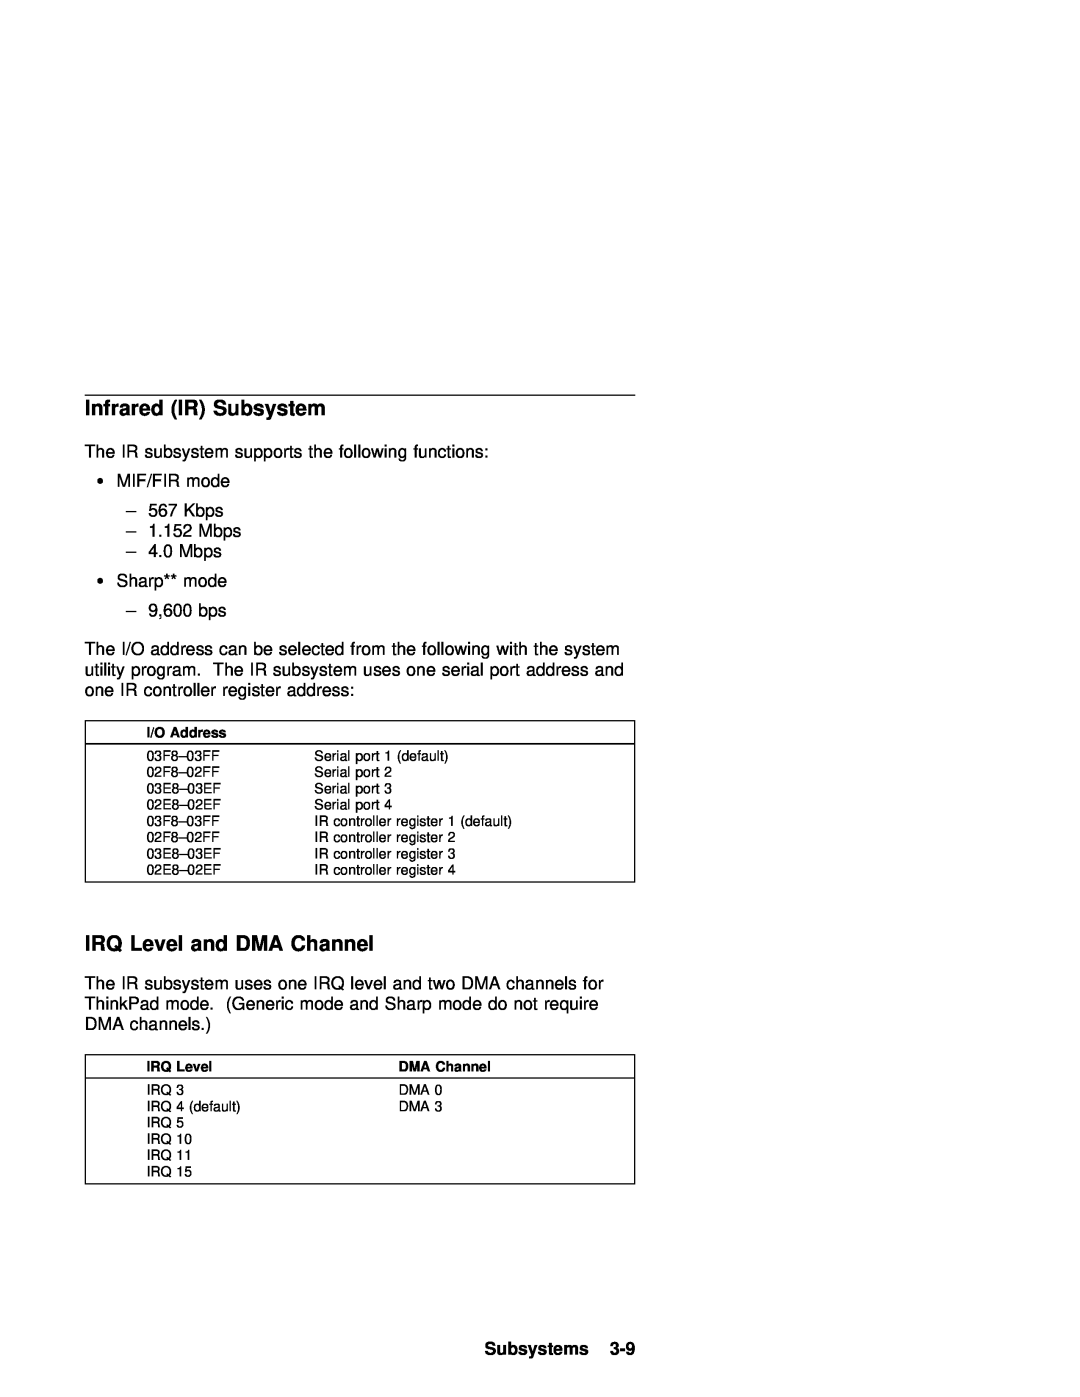 IBM 770 manual Infrared IR Subsystem, DMA Channel, Subsystems 